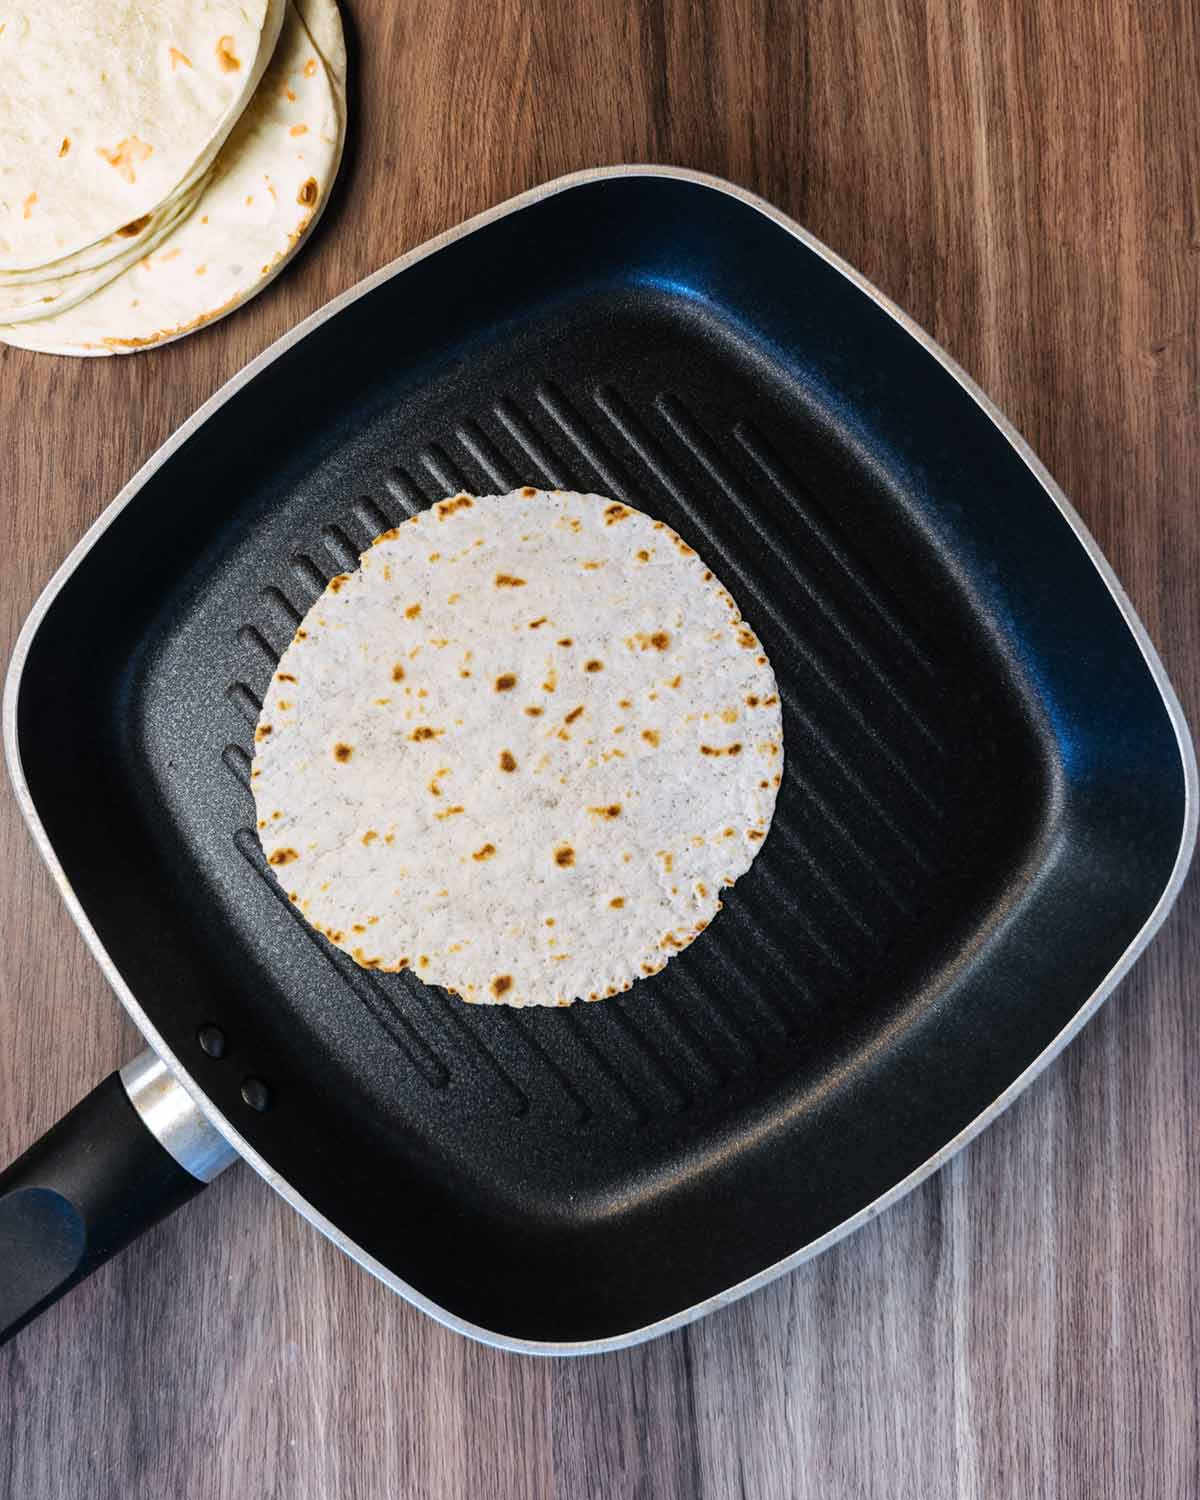 A corn tortilla dry frying in a griddle pan.